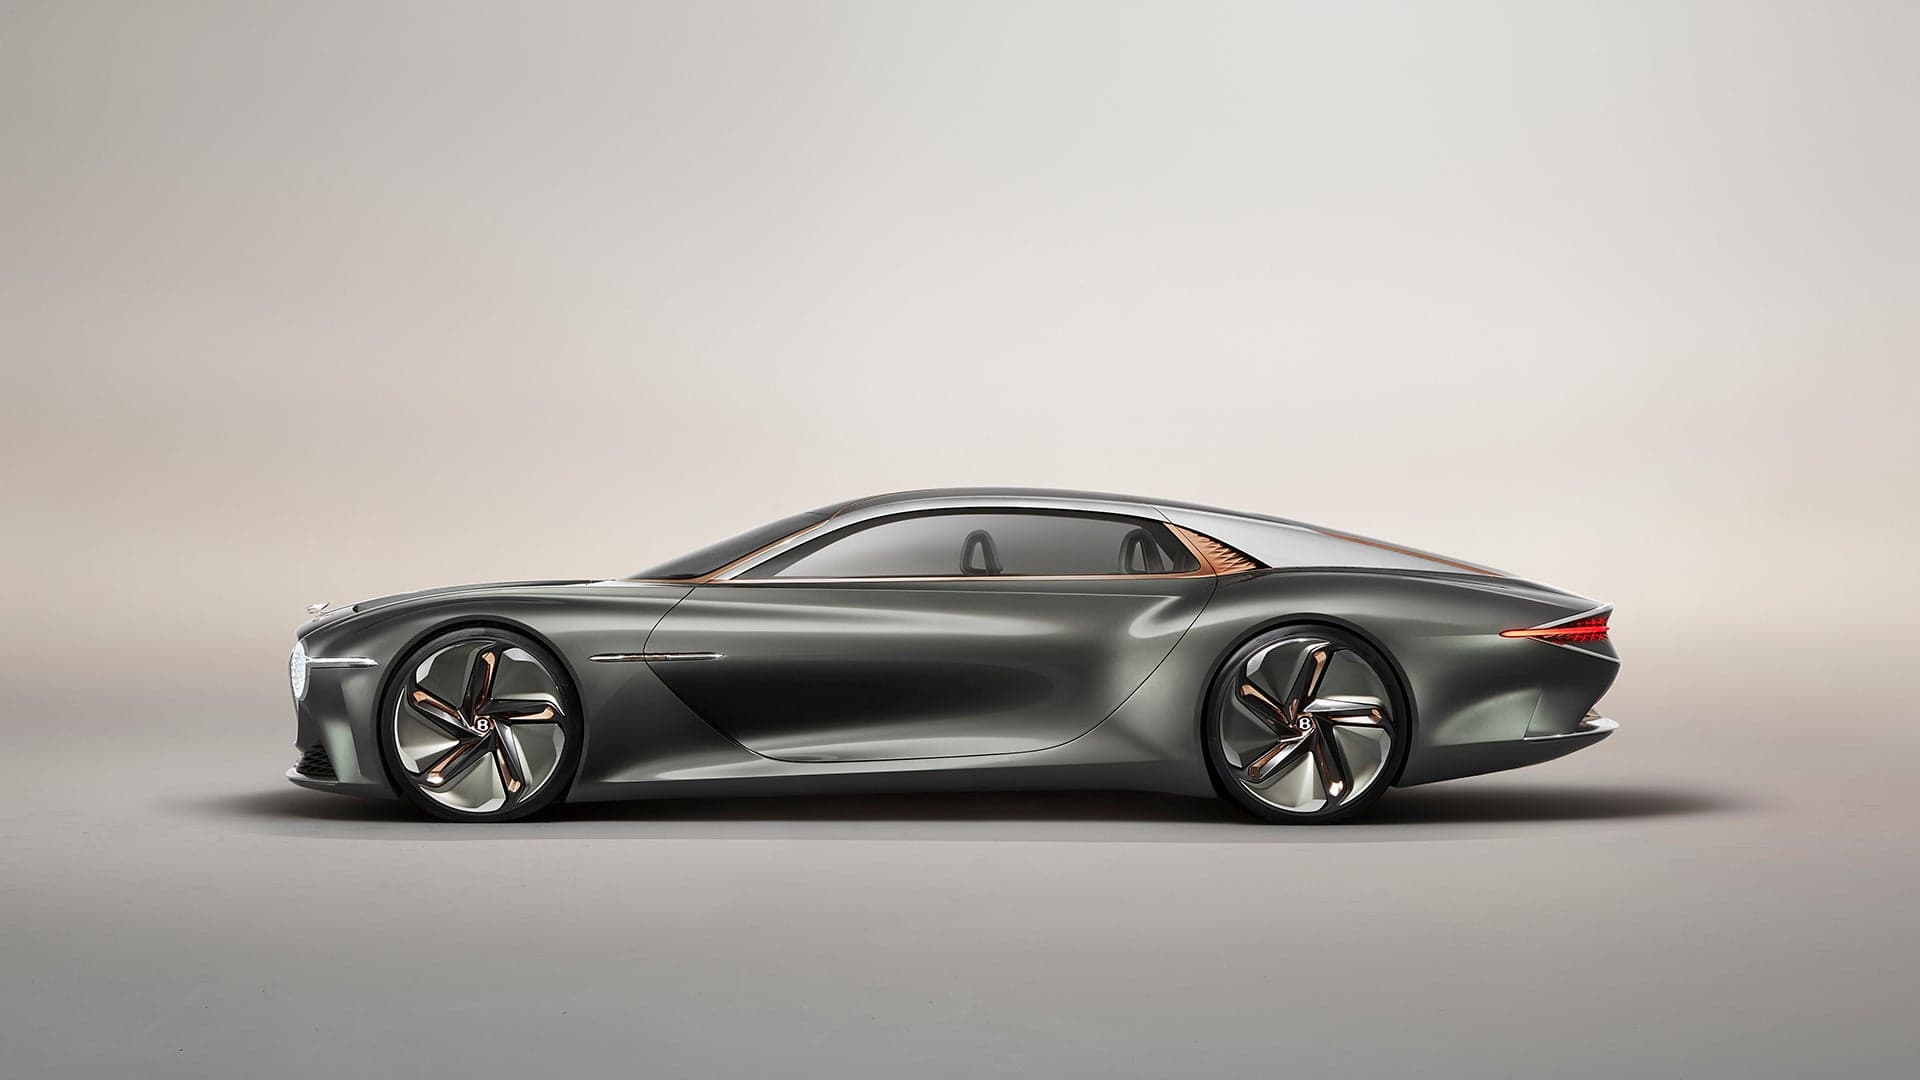 Bentley Commemorates 100-Year Anniversary With Opulent EXP 100 GT Electric Concept